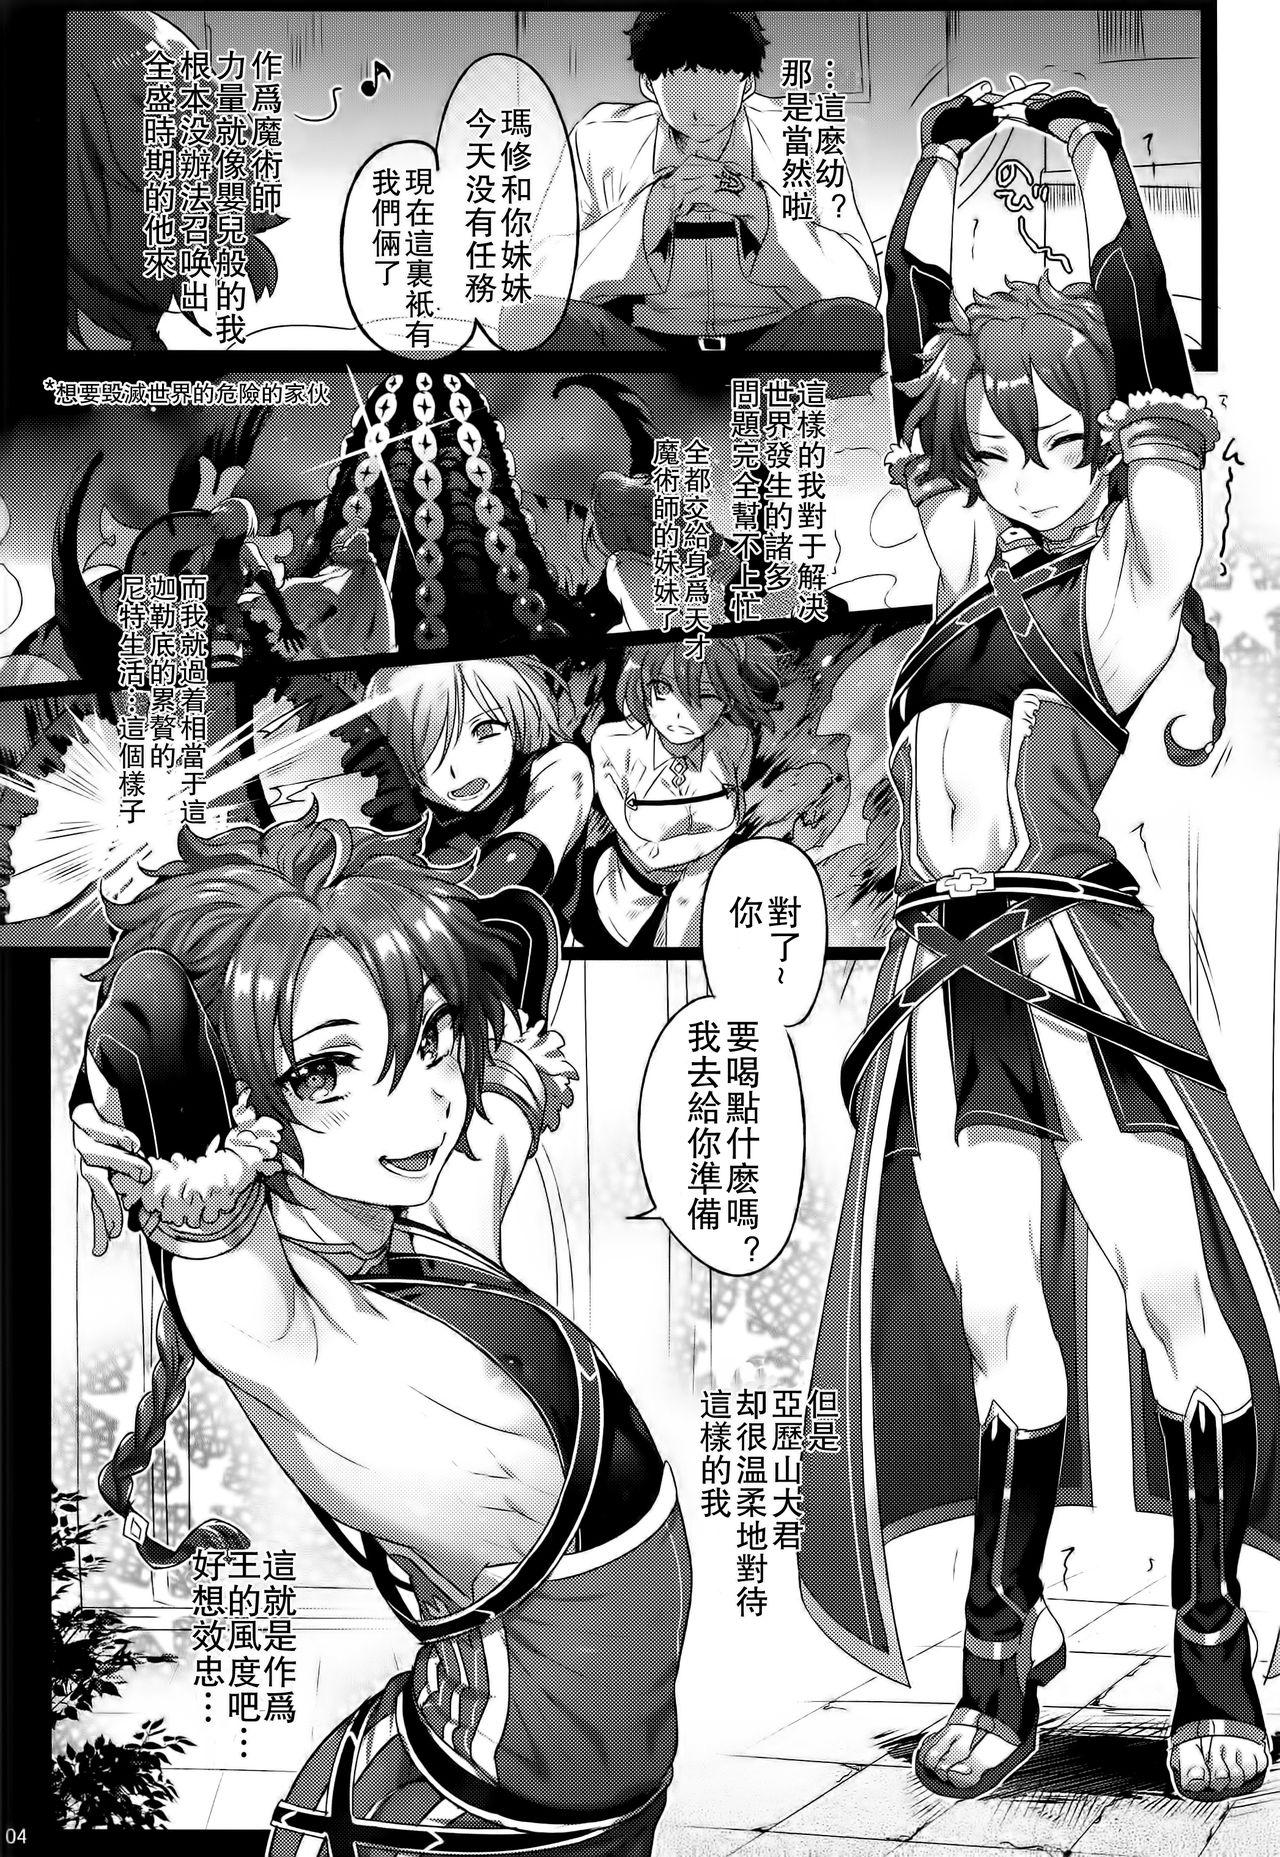 Black Woman Fate/DTorder course:Alexander - Fate grand order She - Page 4